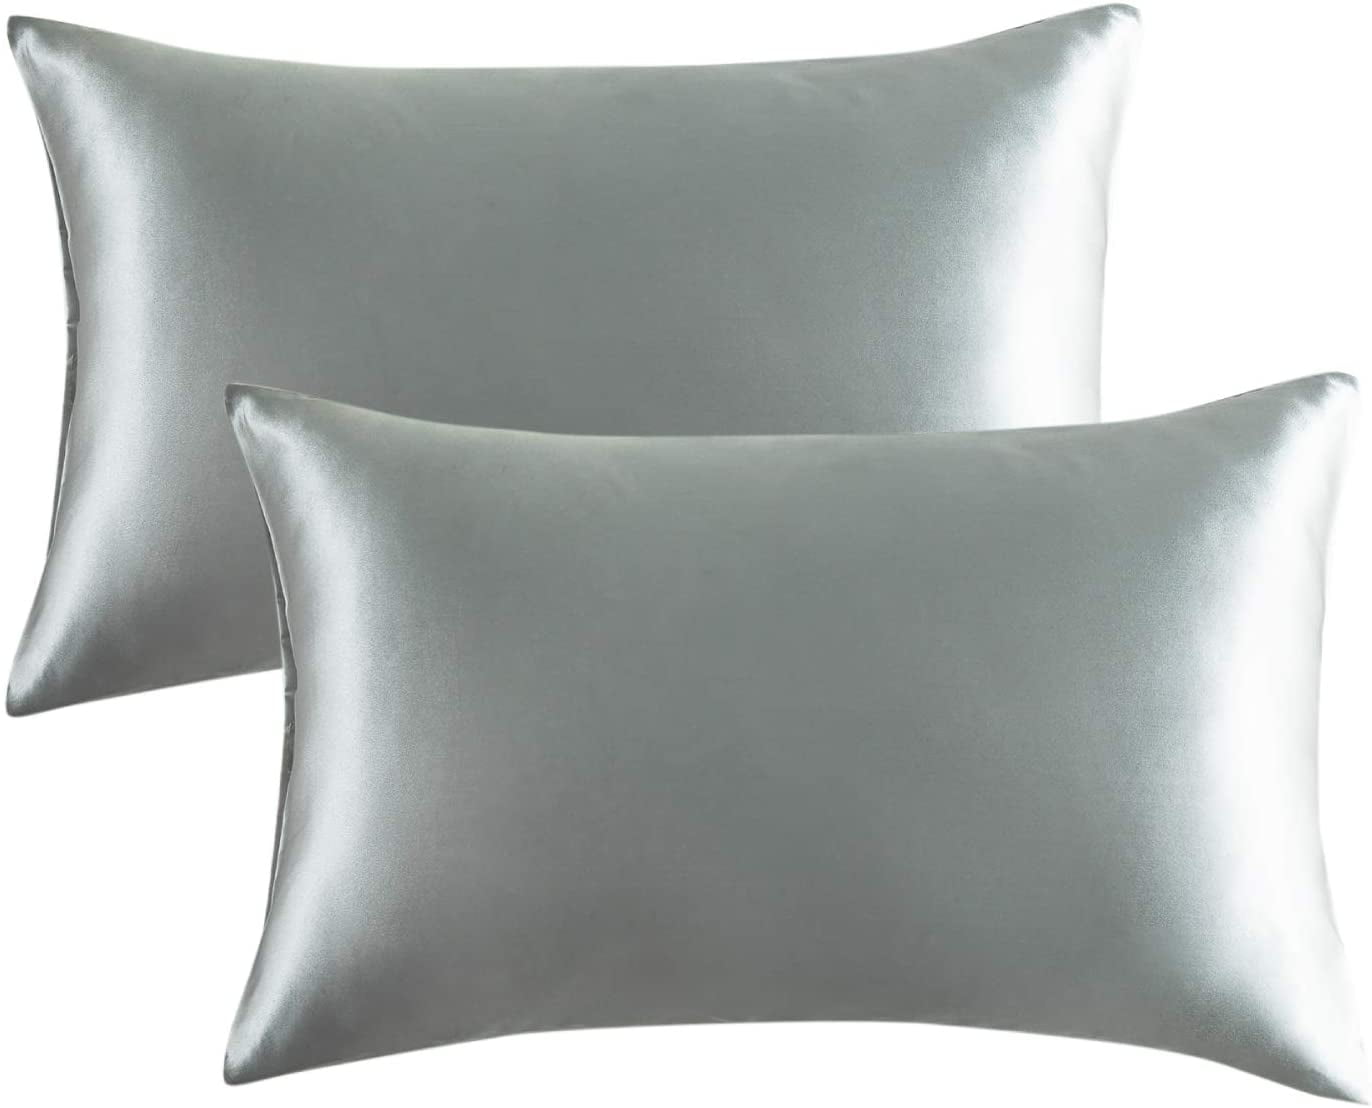 Glazed Satin Pillowcase Ultra Soft Shiny Silky Pillow Cover Cushion Coevr 2 Pack 